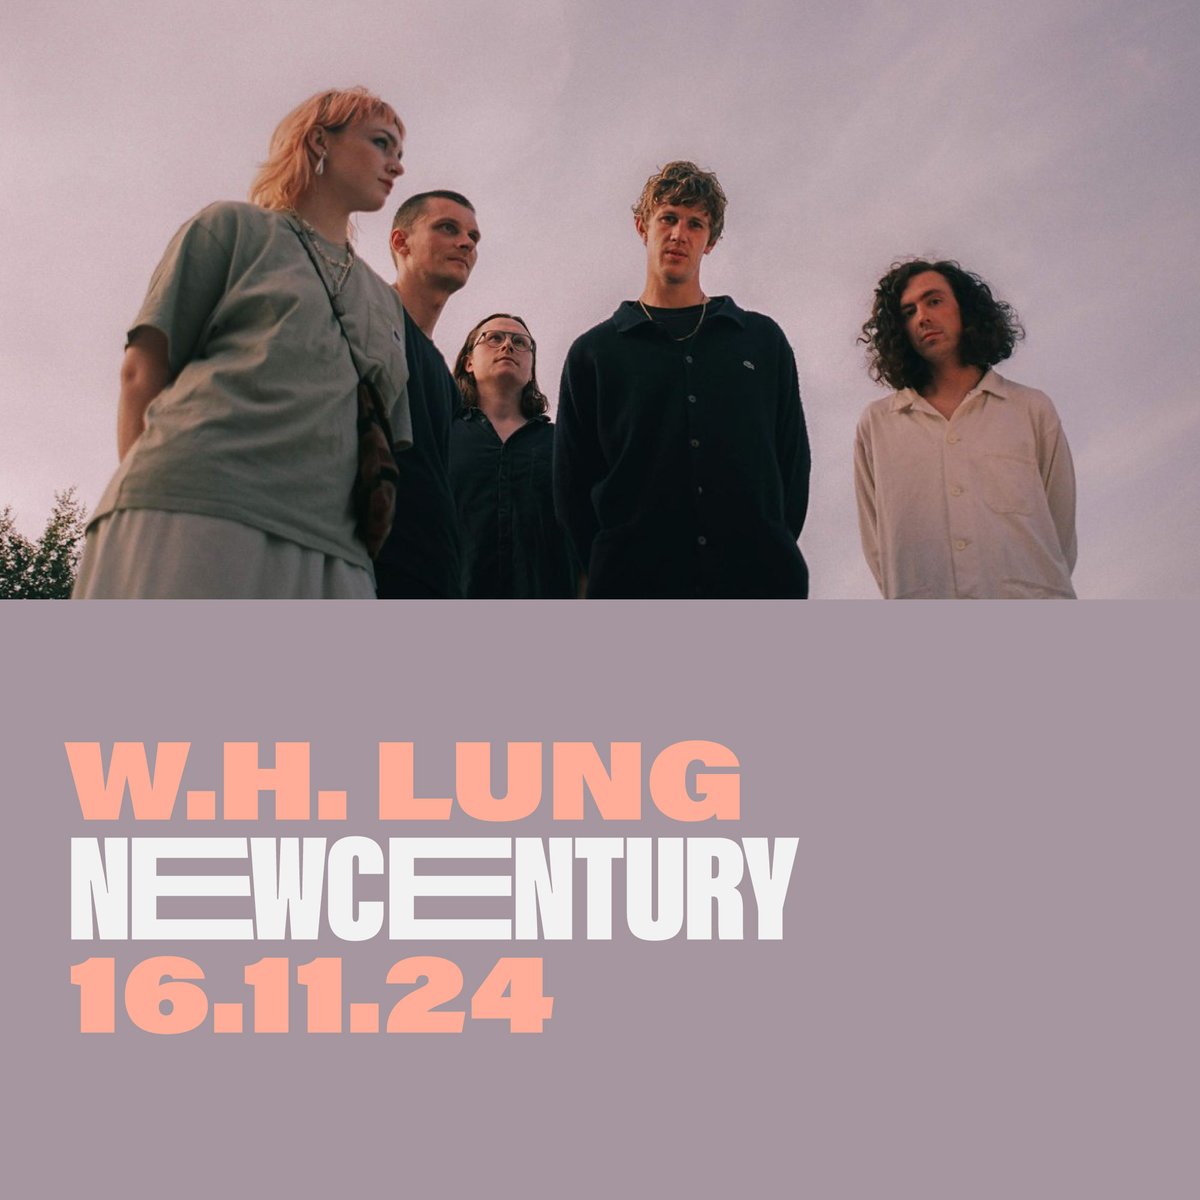 ON SALE NOW Manchester’s own @whlungmusic bring their idiosyncratic, euphoric electro-pop to New Century on 16th November. Tickets: link.dice.fm/zf4a374d5fad